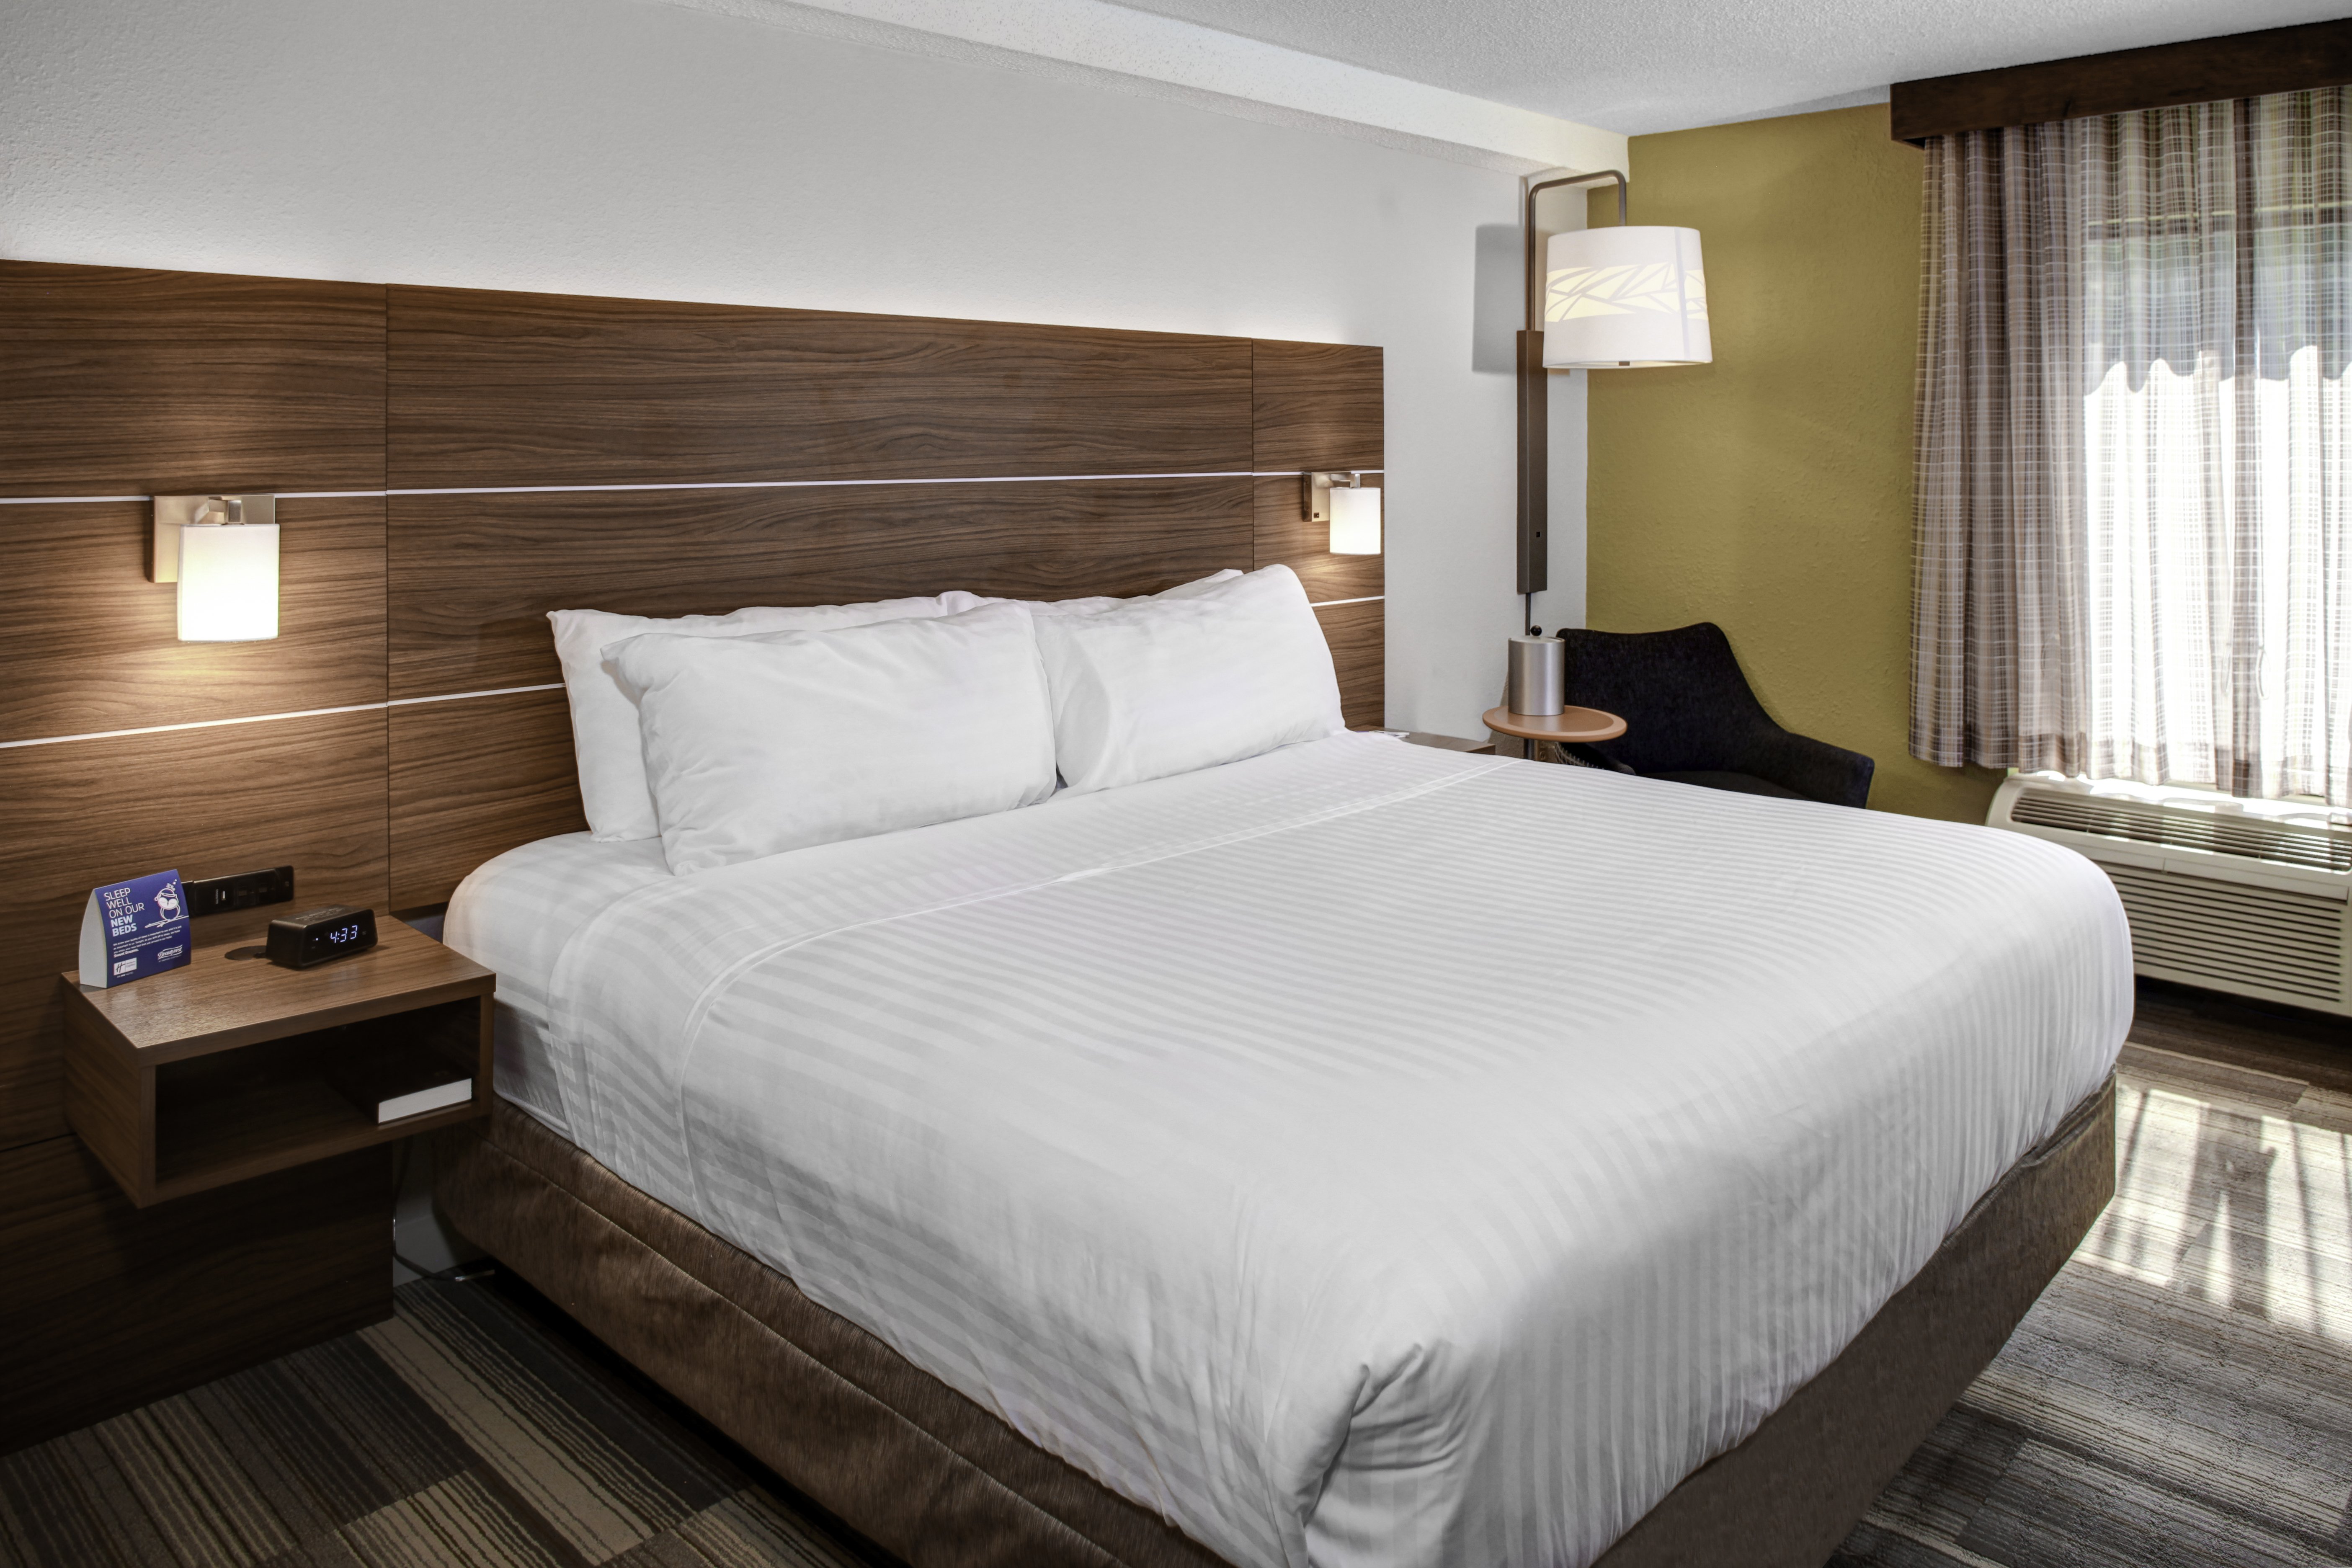 Be the Readiest After a Great Night's Sleep on Our NEW King Beds!!